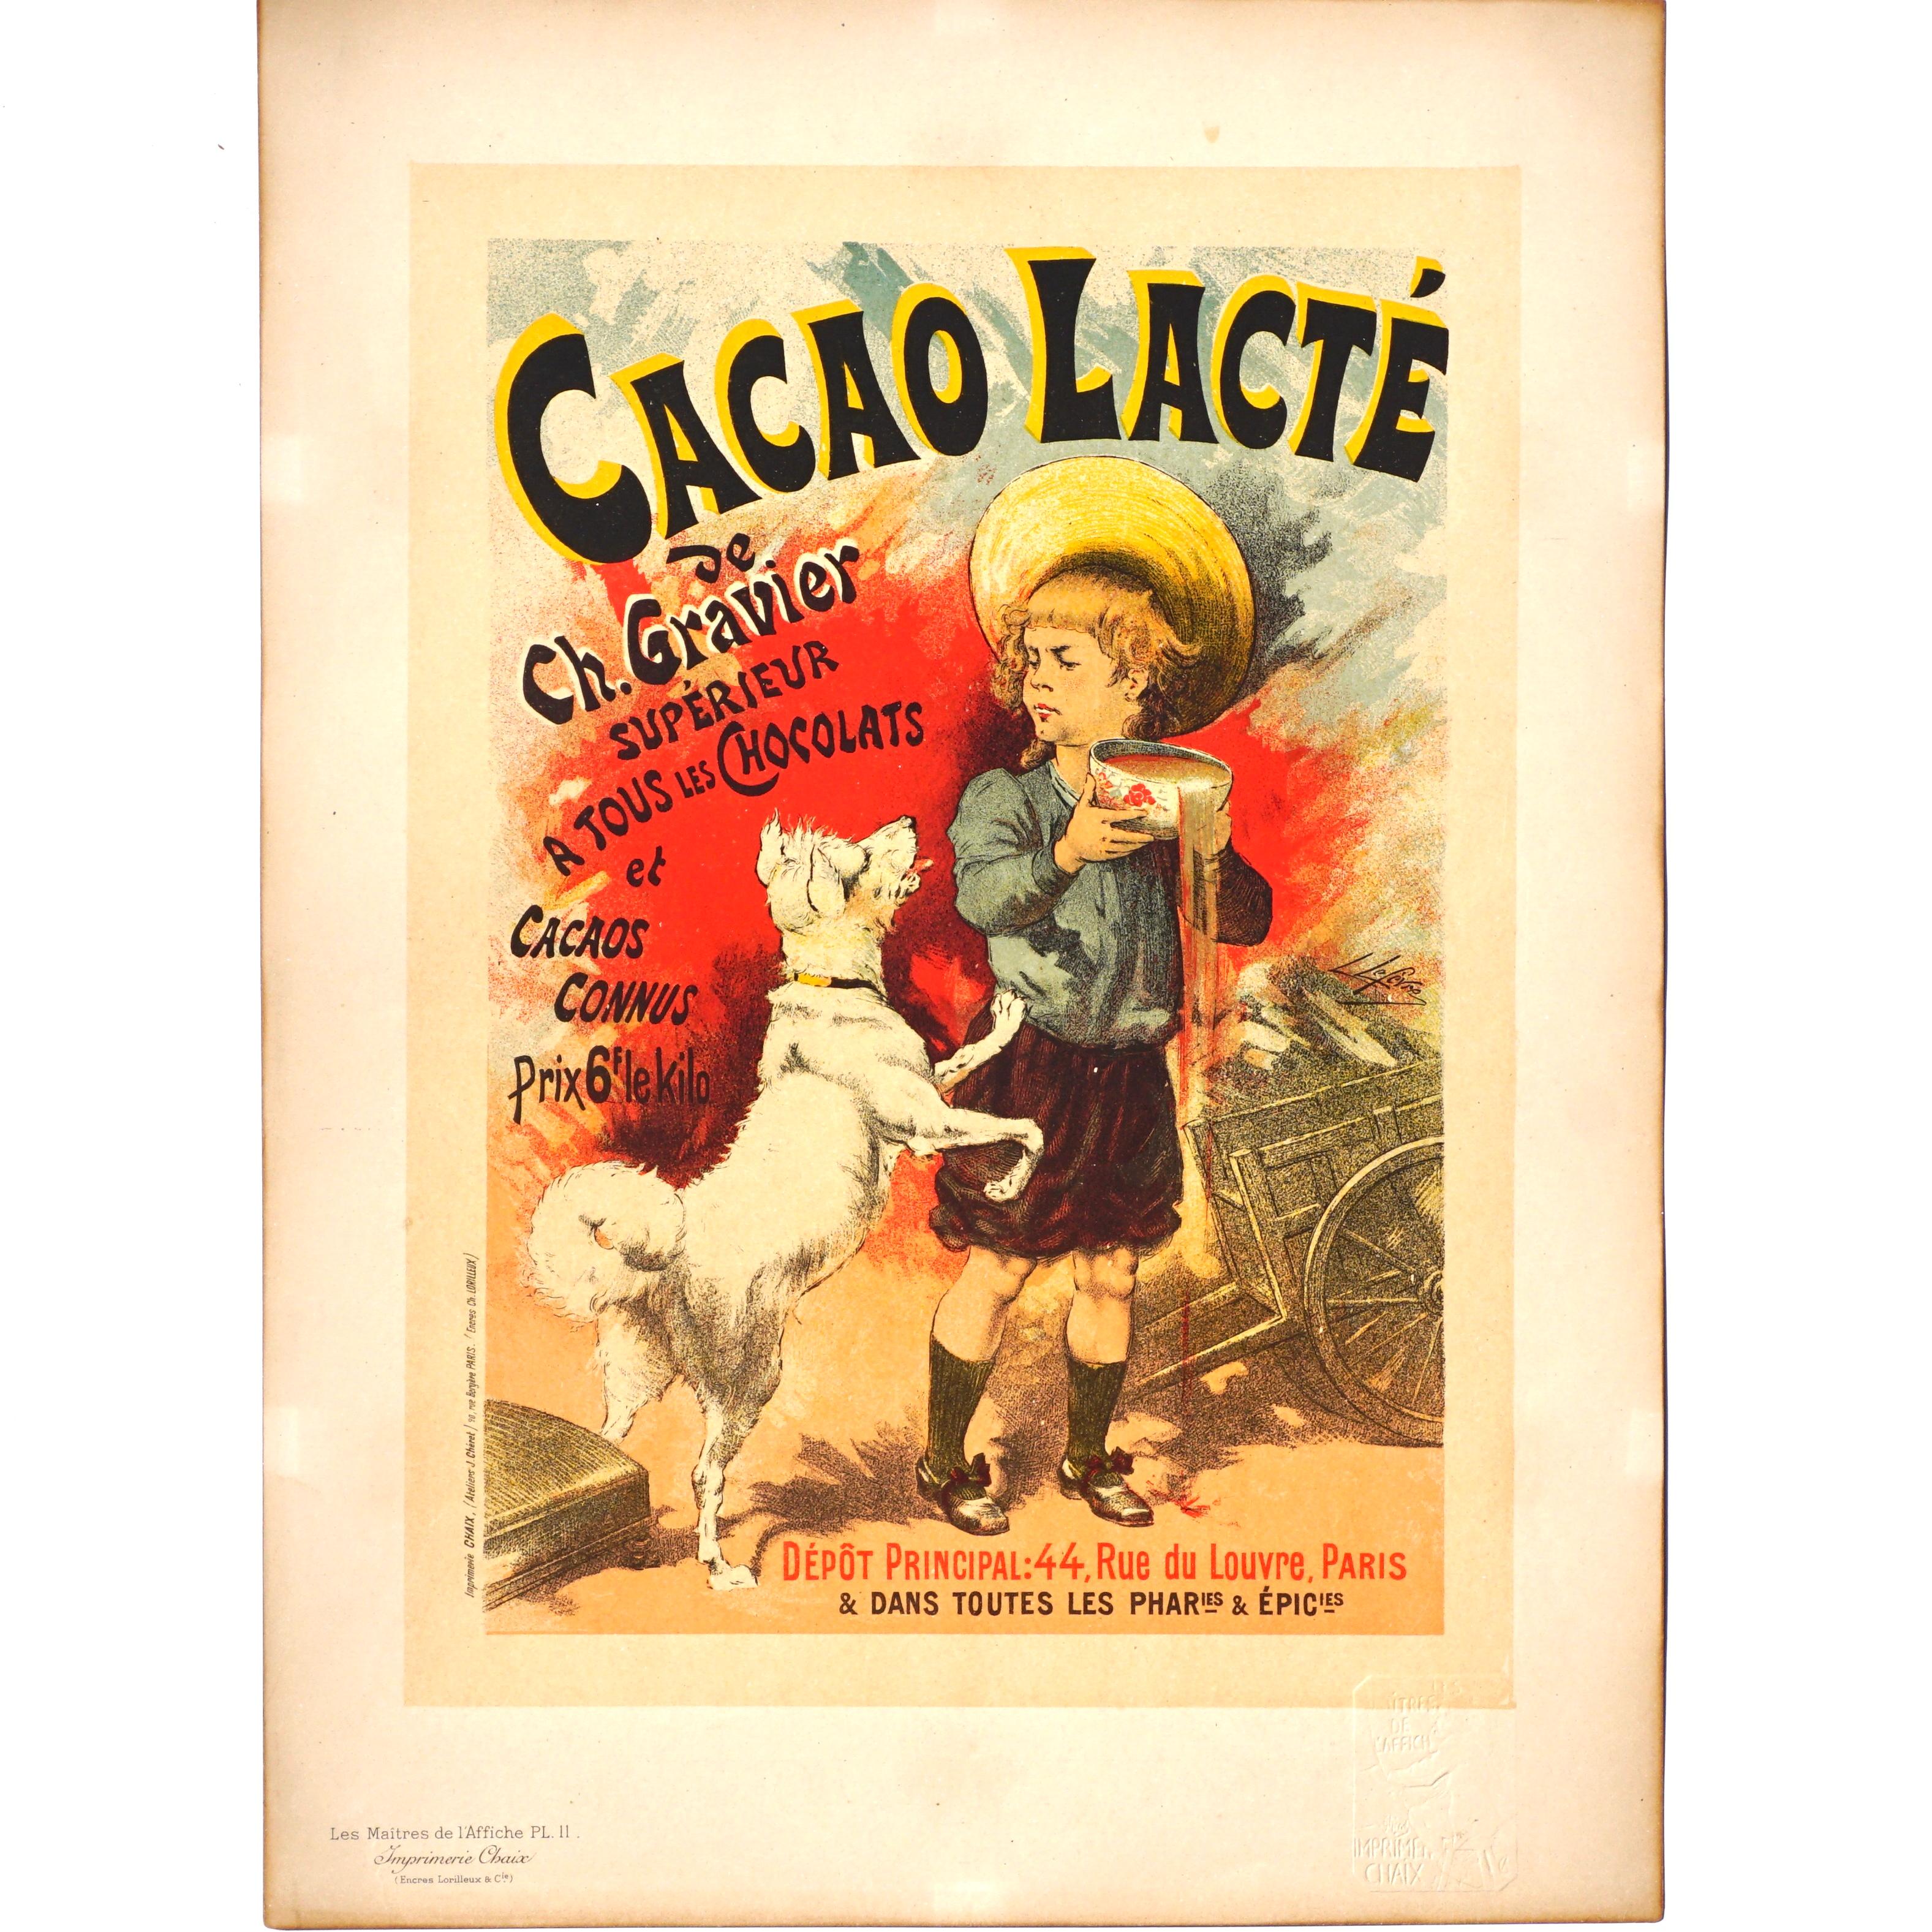 Artist: Lucien Lefevre French (1850-1902) Plate: PL. 11, circa 1896
Title: Cacao Lacte
Condition A. Original lithograph from 